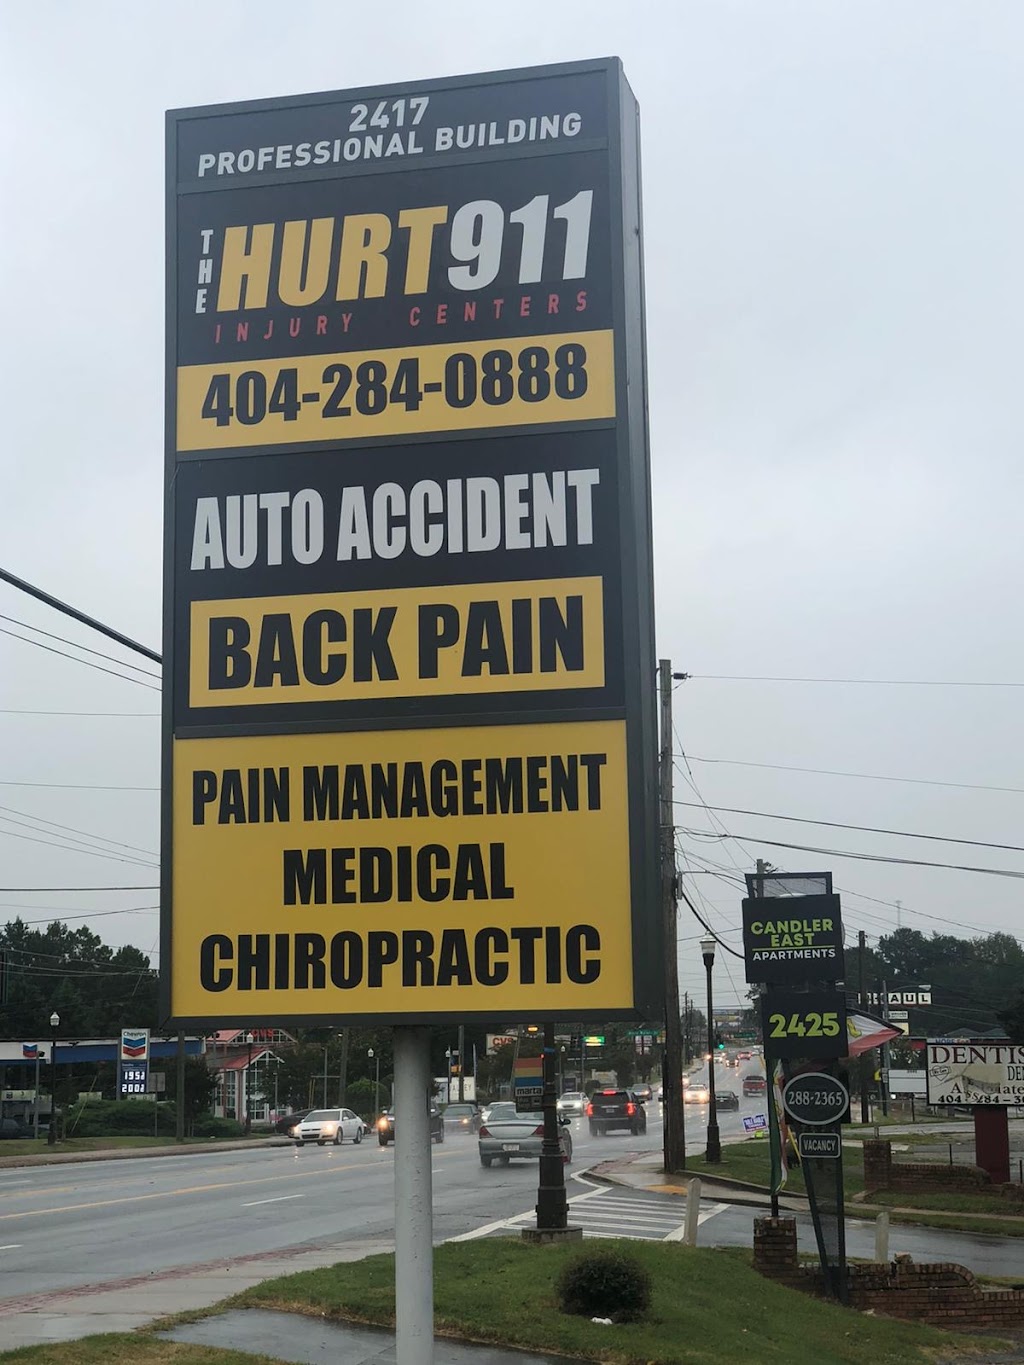 The Hurt 911 Injury Centers | 2417 Candler Rd, Decatur, GA 30032 | Phone: (404) 900-0443